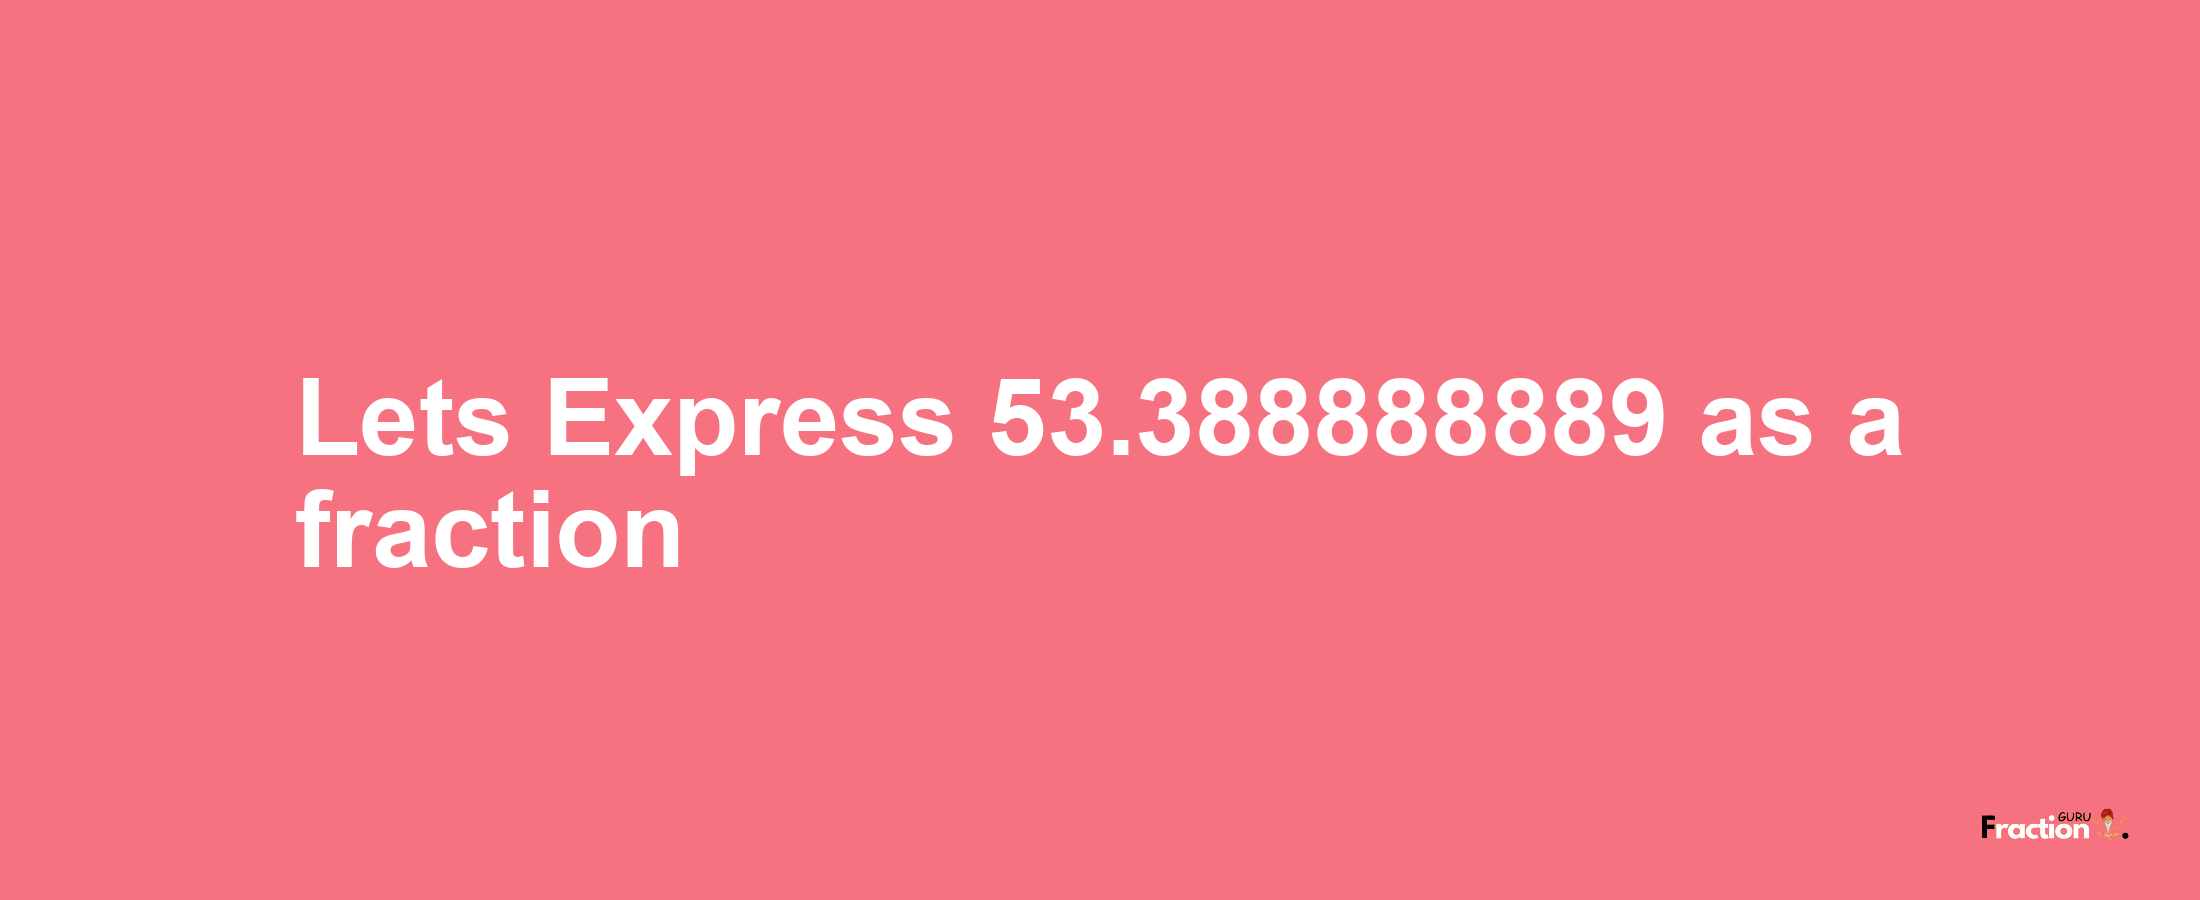 Lets Express 53.388888889 as afraction